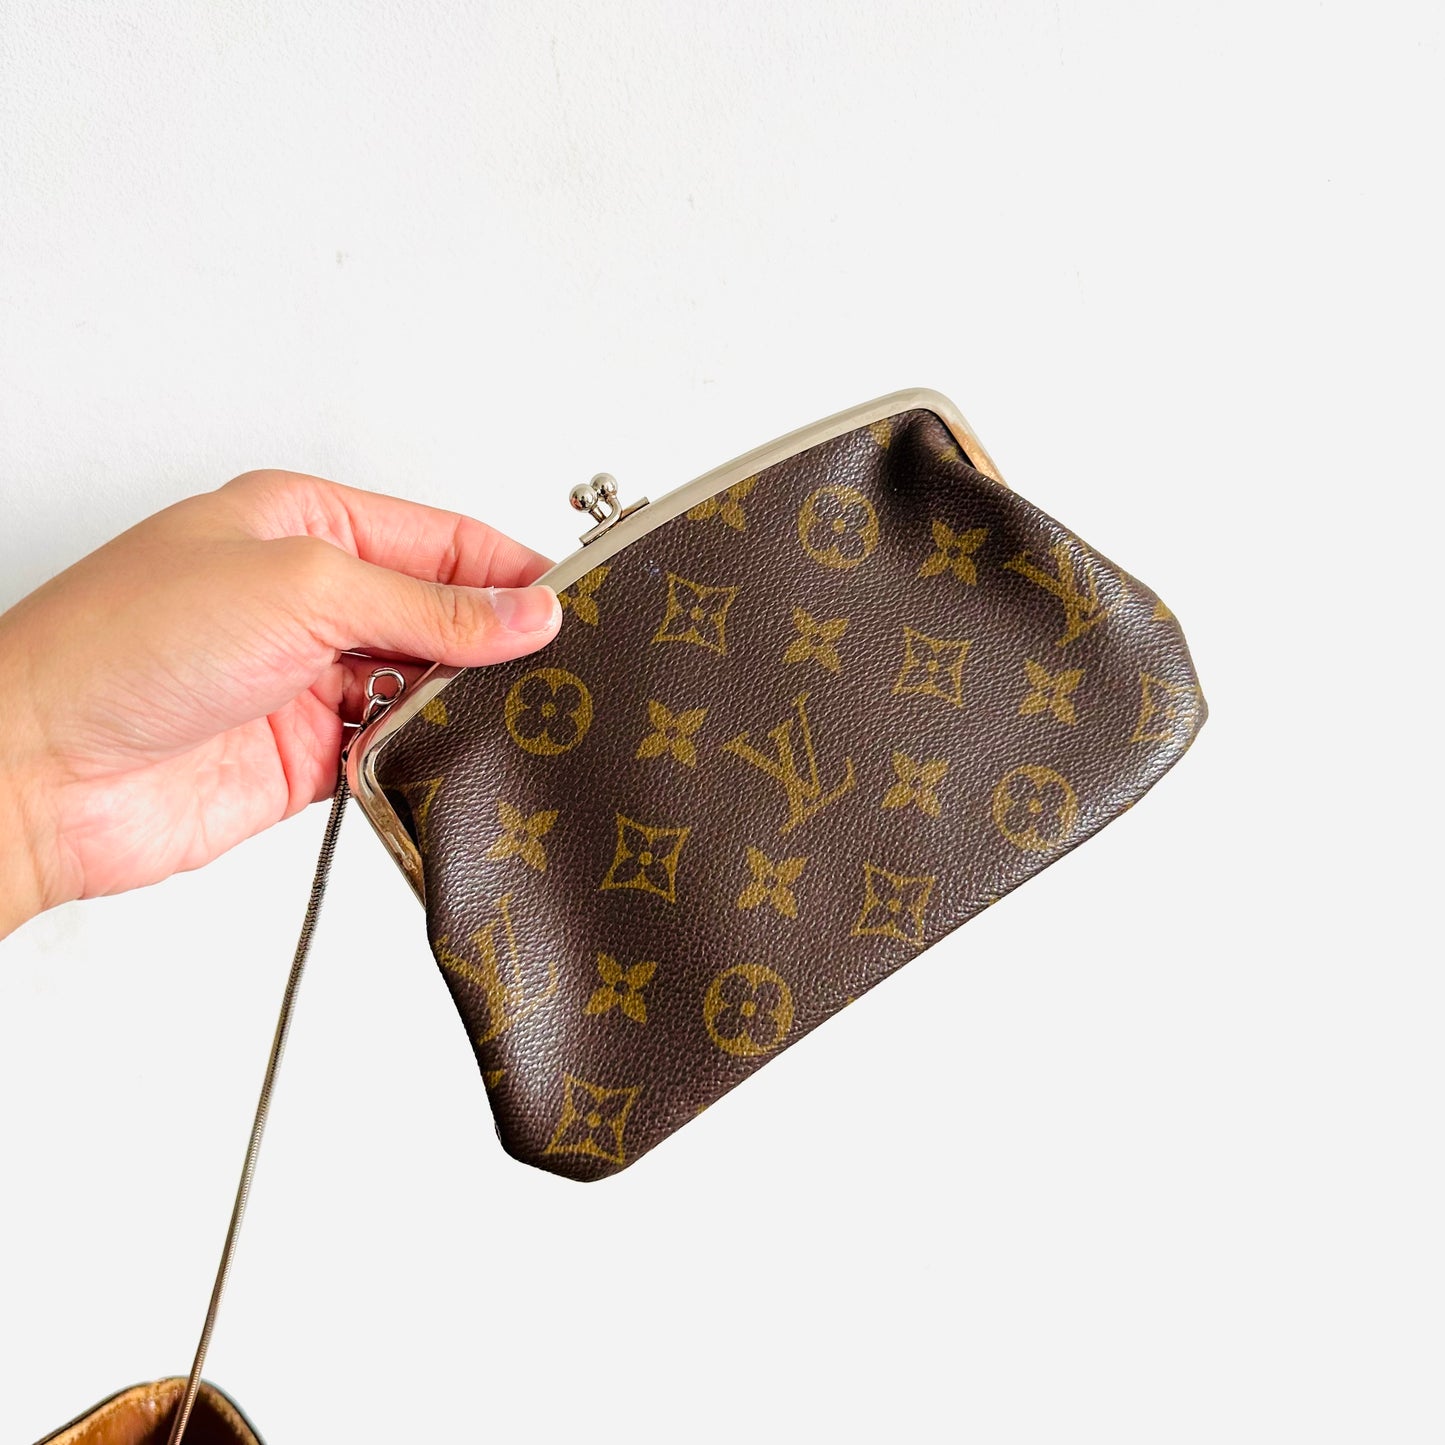 Louis Vuitton LV French Company Bucket Monogram Logo GHW Vintage Shoulder Tote Bag With Pouch Purse